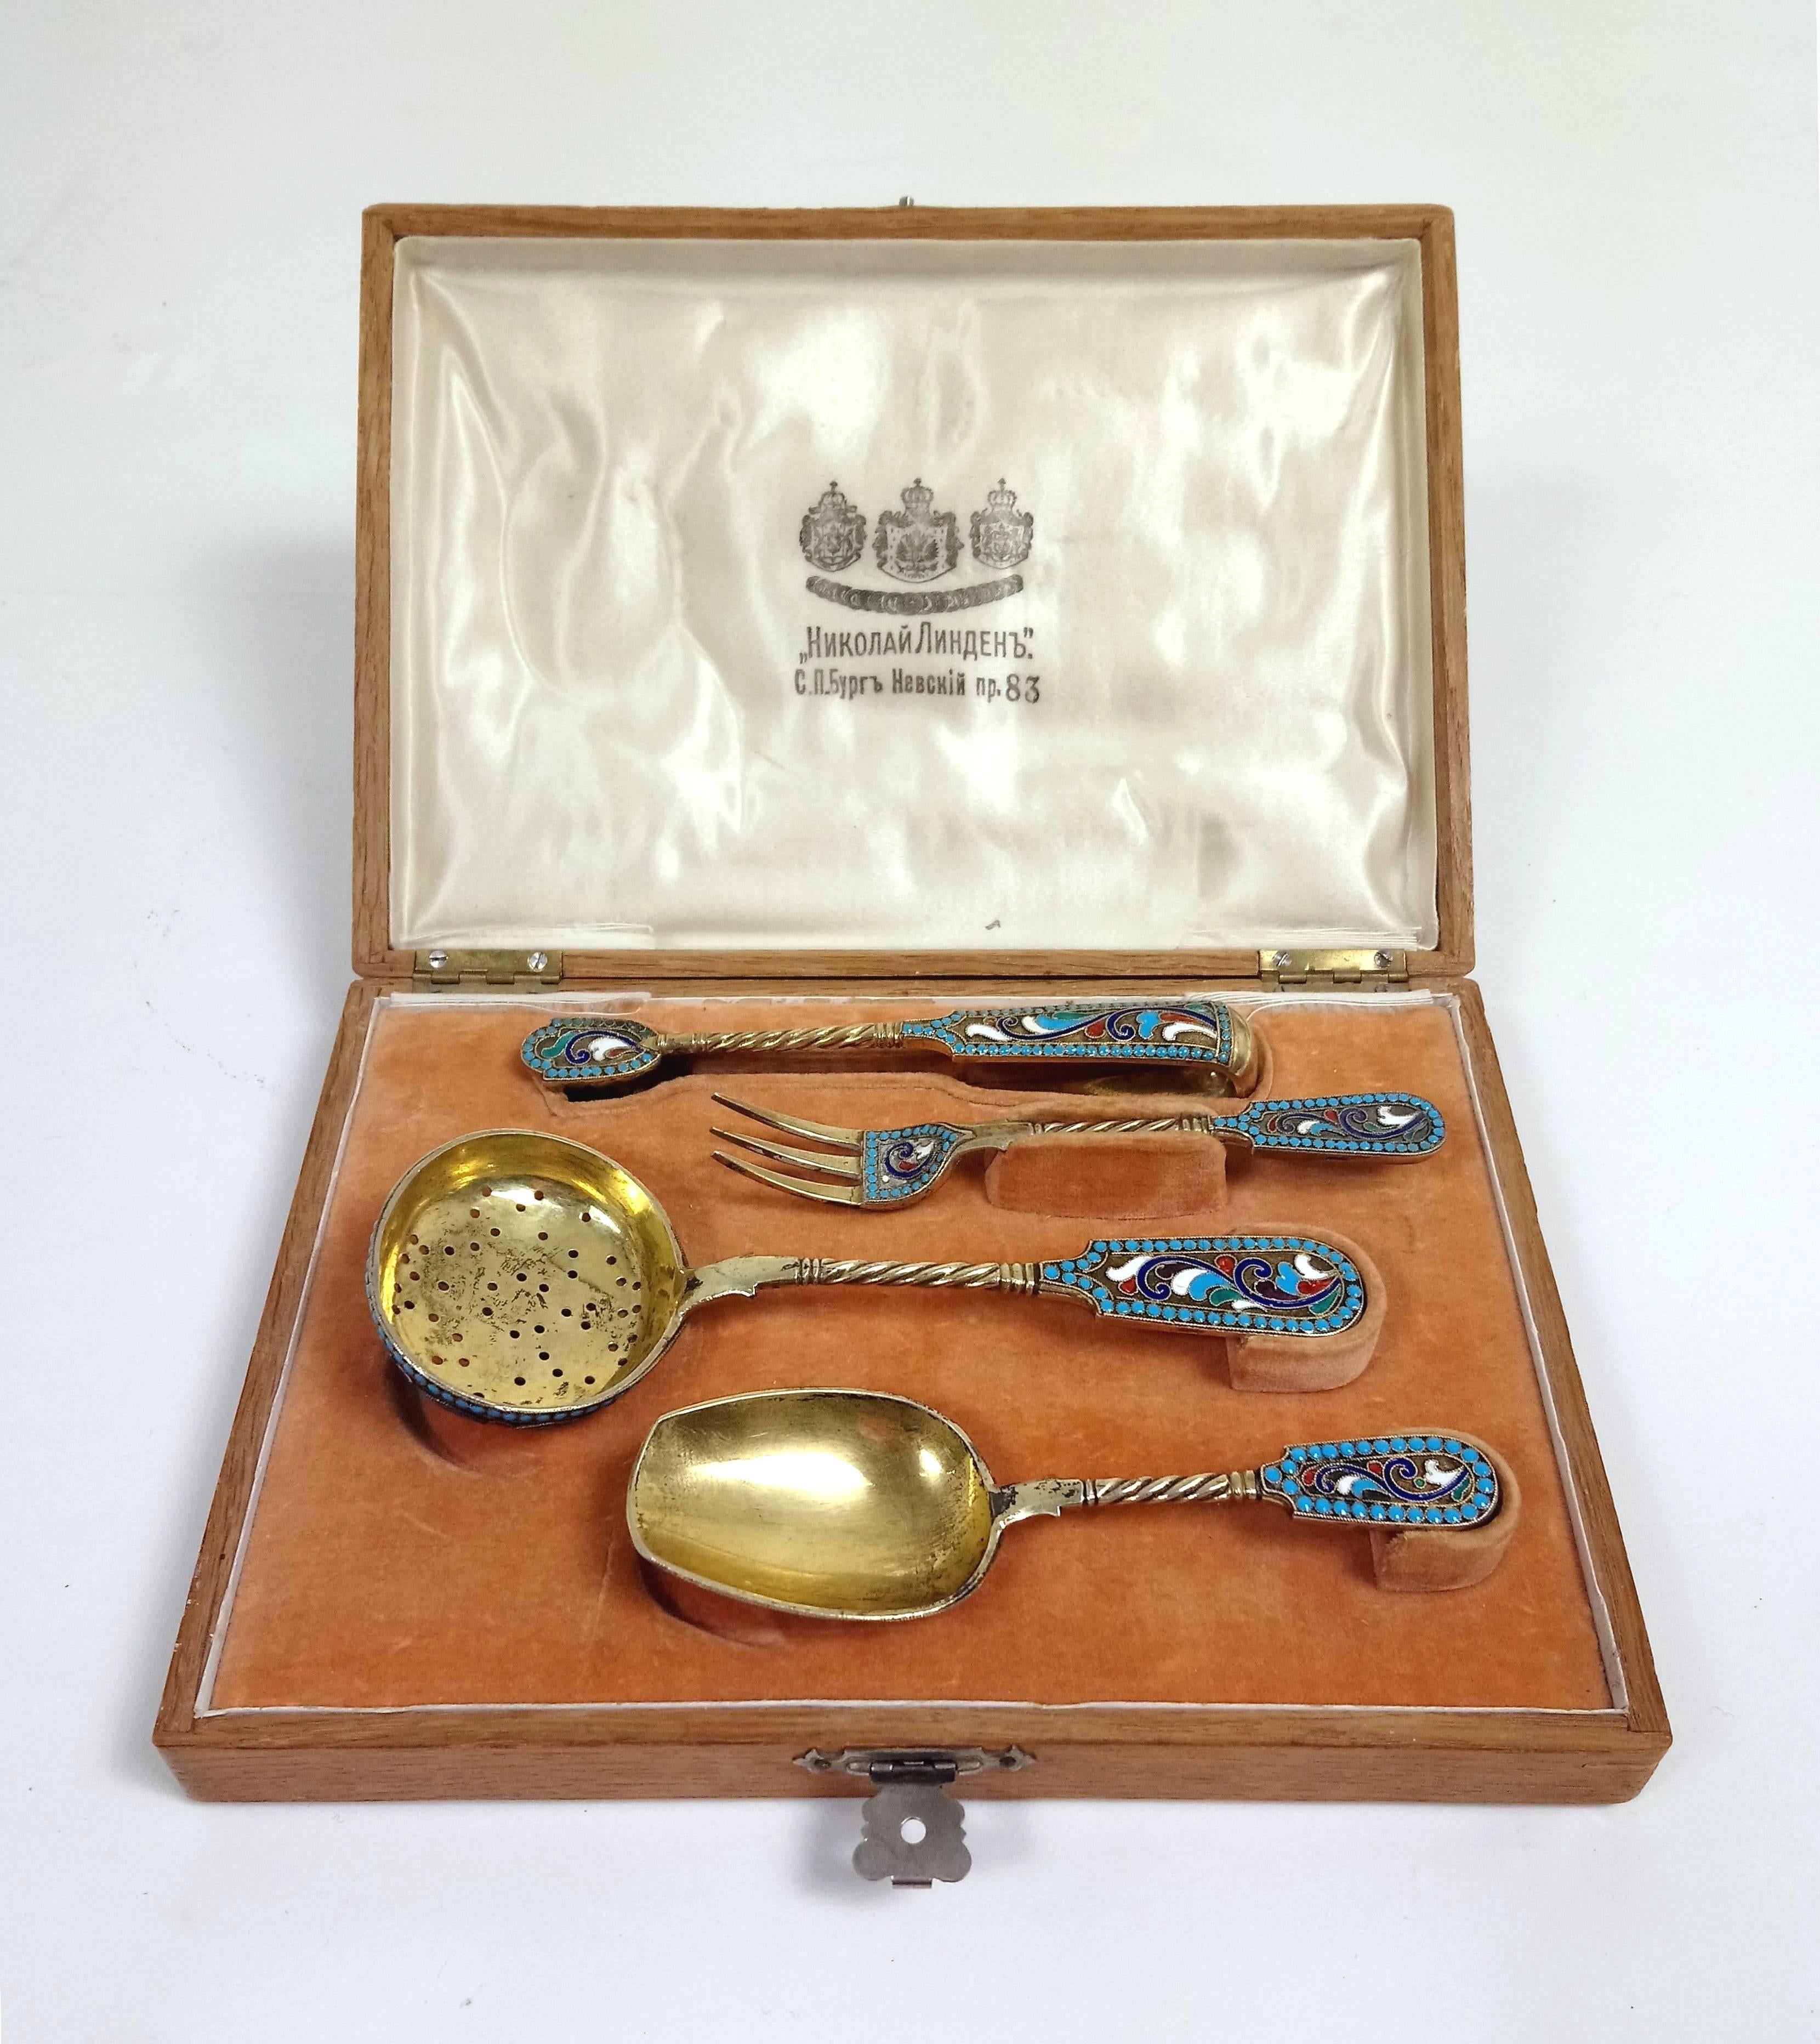 This exquisitely designed and beautifully crafted late 19th century silver gilt and Champlevé enamel tea serving set is complete in its original fitted box. It measures 8 in – 20.3 cm wide, 5 3/4 in – 14.6 cm deep and 2 in – 5 cm in height. The set